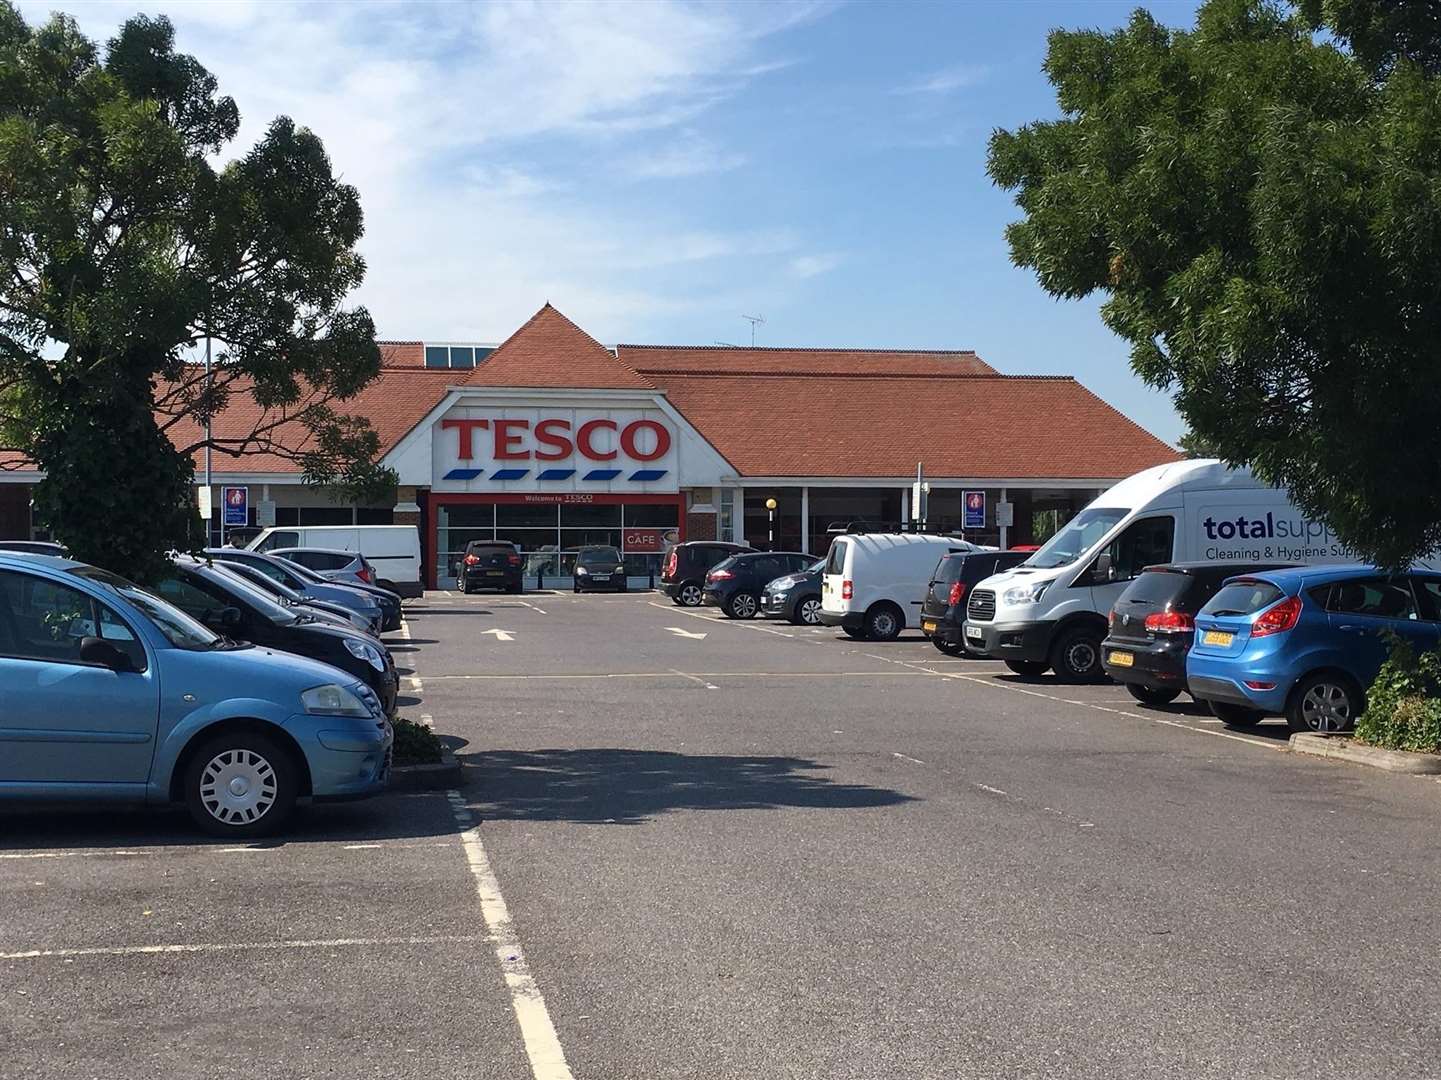 The attack happened in the car park of Tesco (3299204)